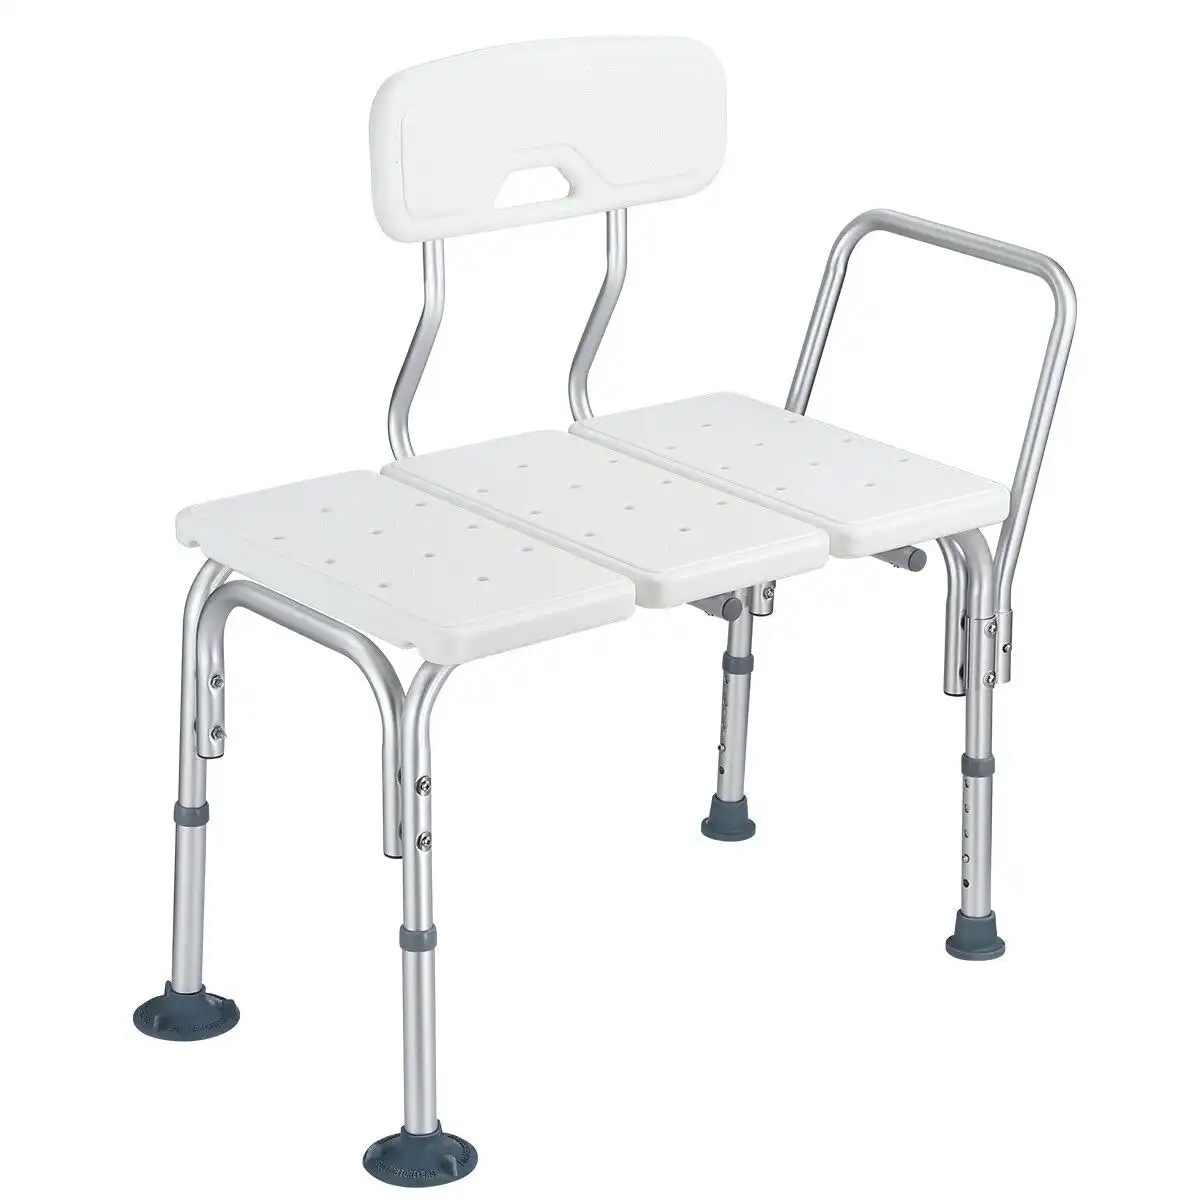 Ausway Medical Tub Transfer Bench Adjustable Shower Bath Seat Stool with Armrest and Back